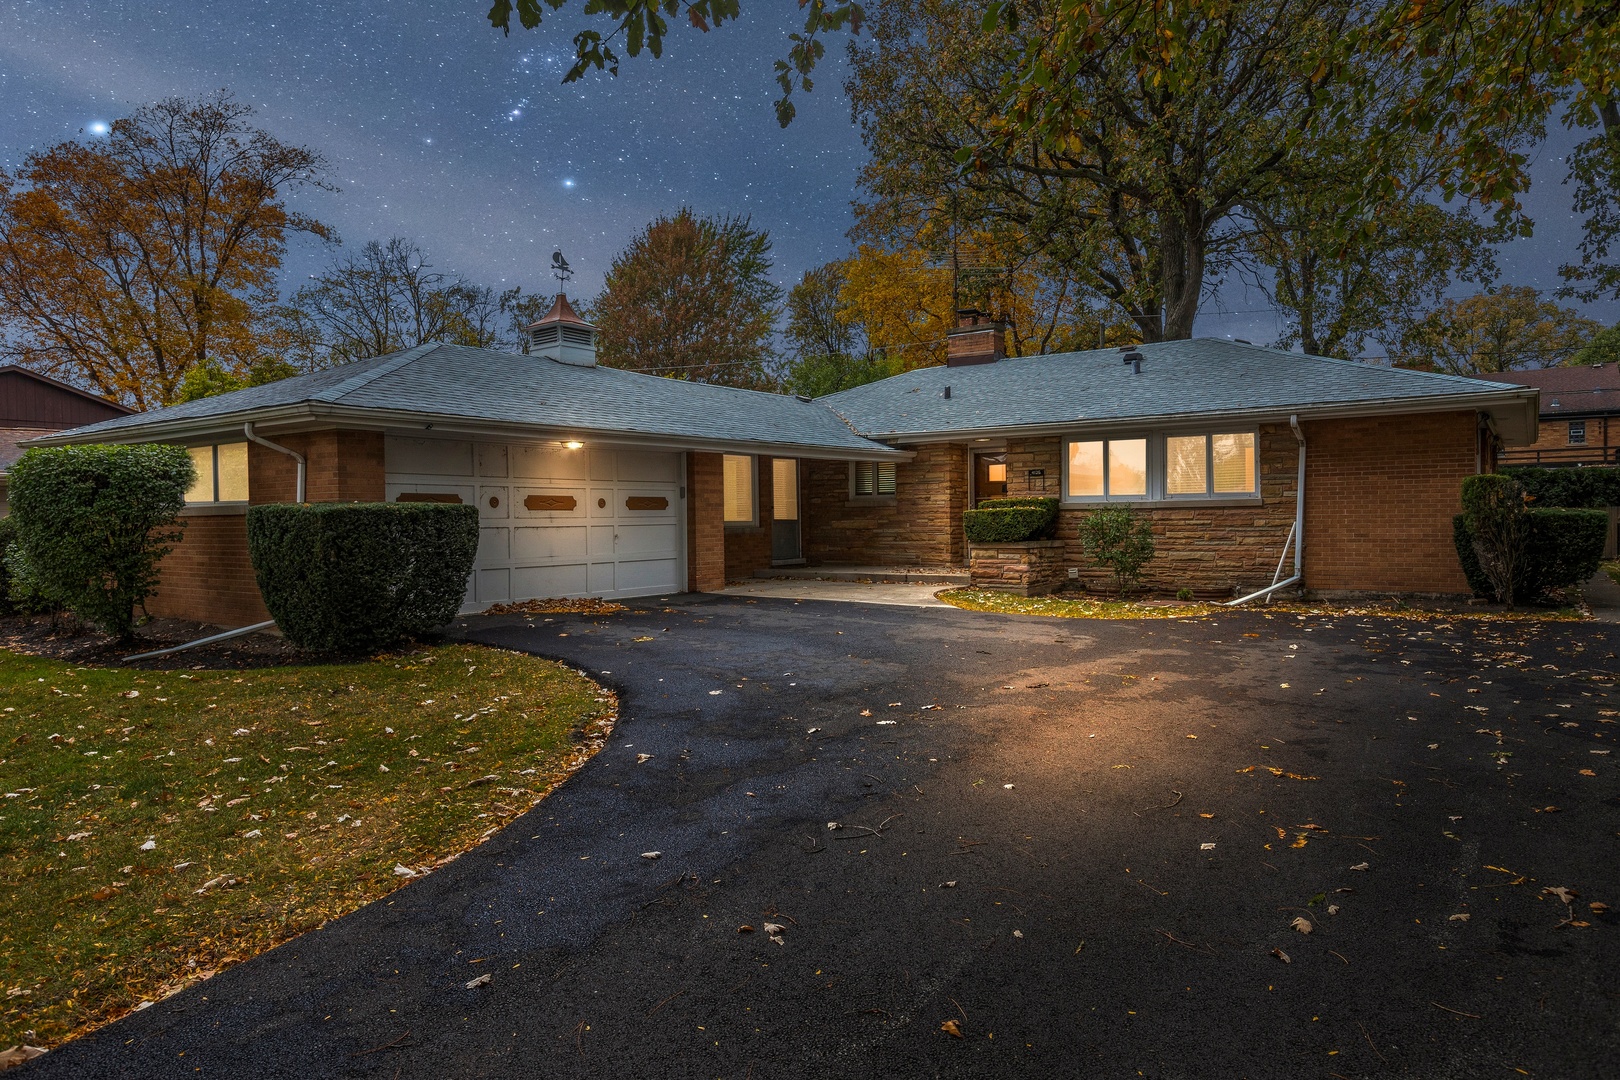 Skokie IL Homes for Sale - Skokie Real Estate | Bowers Realty Group